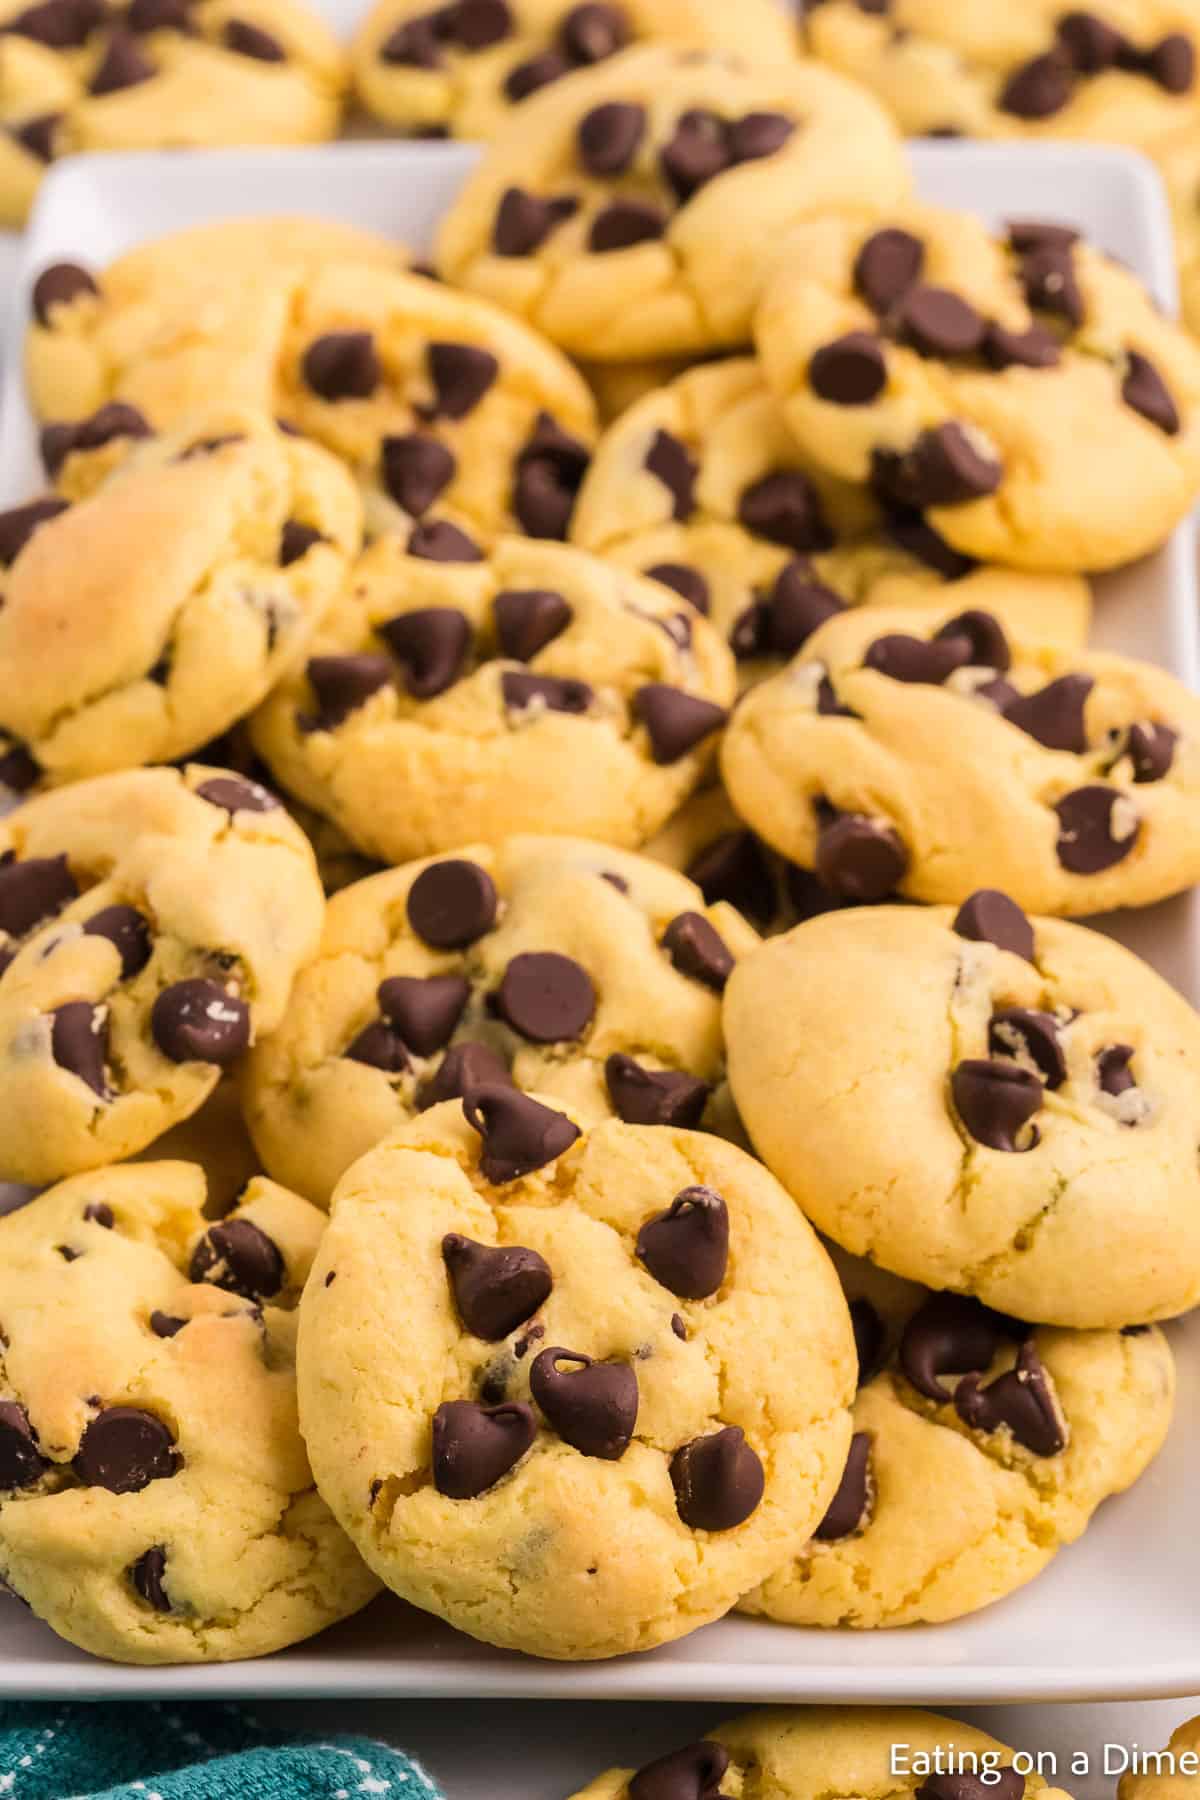 Chocolate Chip Cookies stacked on a platter